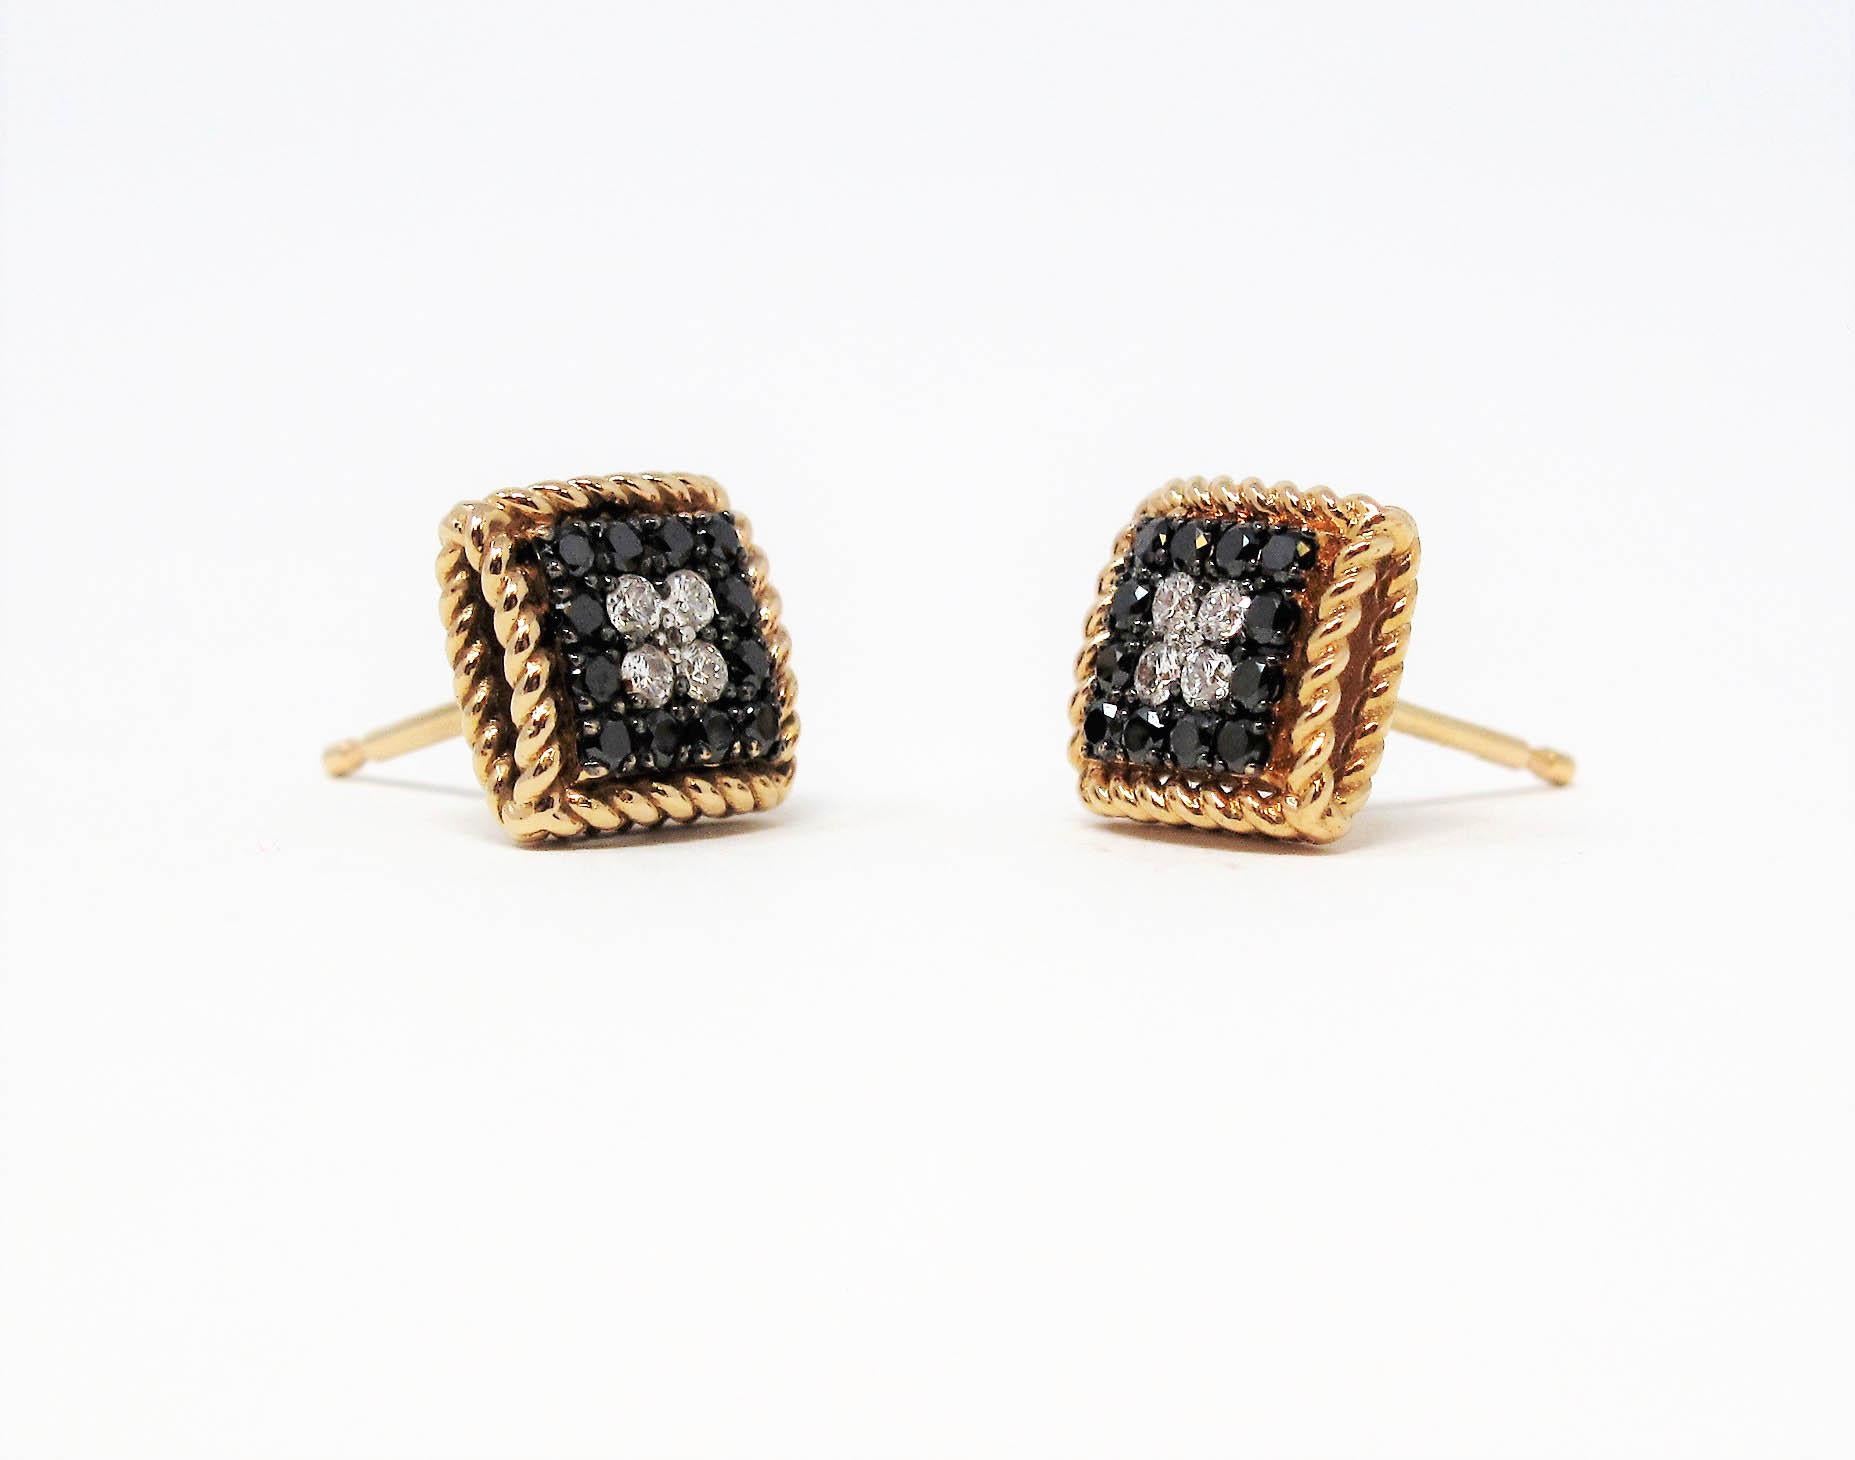 Exquisite, modern pave diamond stud earrings by esteemed jewelry designer, Roberto Coin. The stunning contrast of the black and white diamonds are brought together by the warmth of the rose gold setting. These stylish earrings are perfect for any